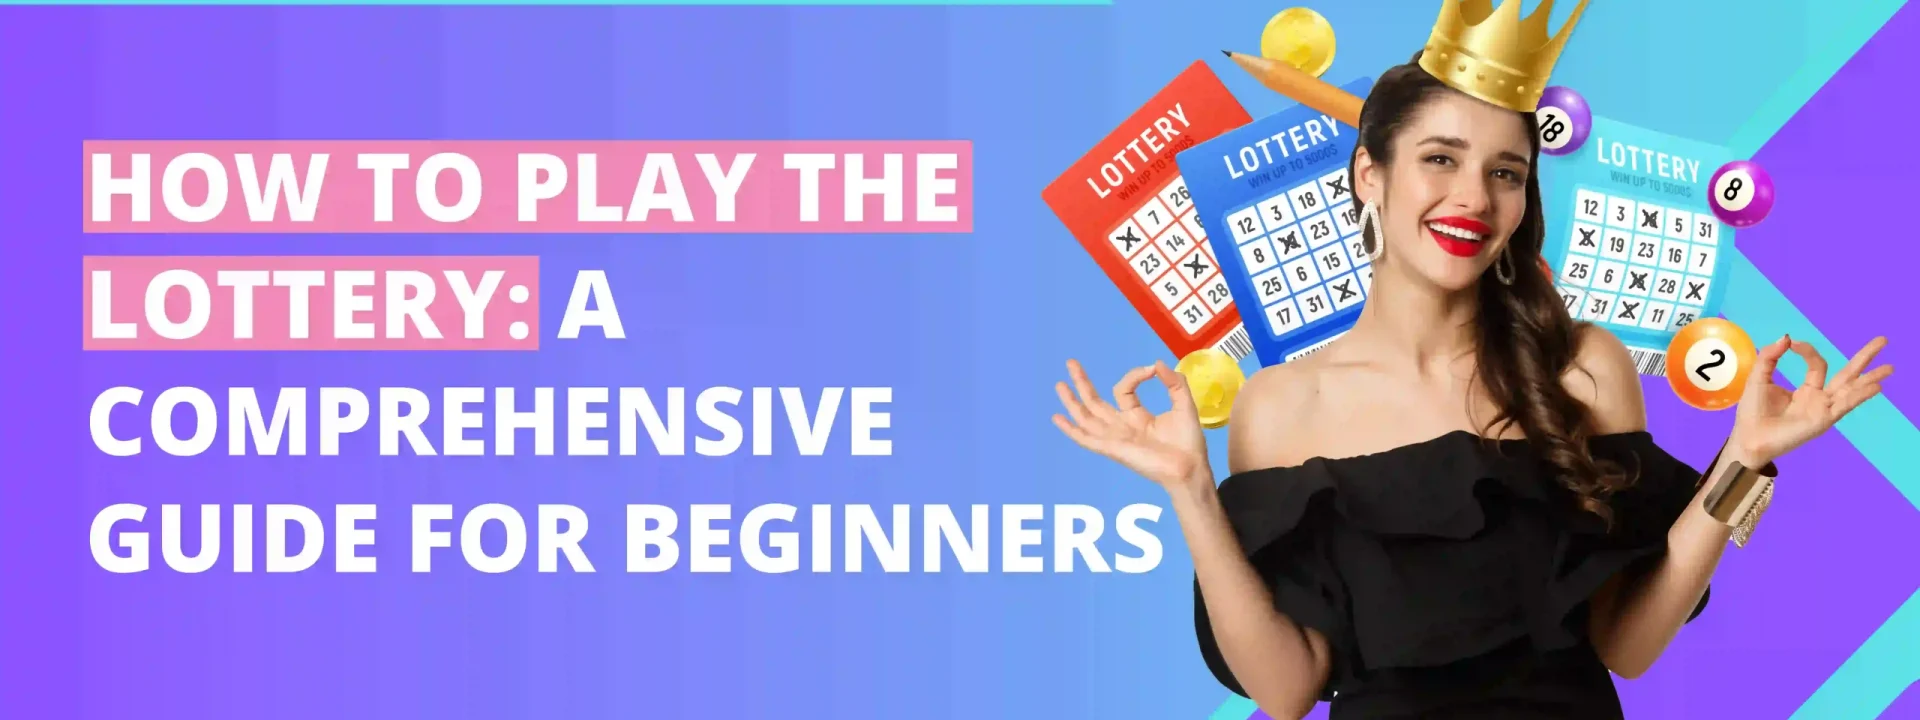 How to Play the Lottery: A Comprehensive Guide for Beginners